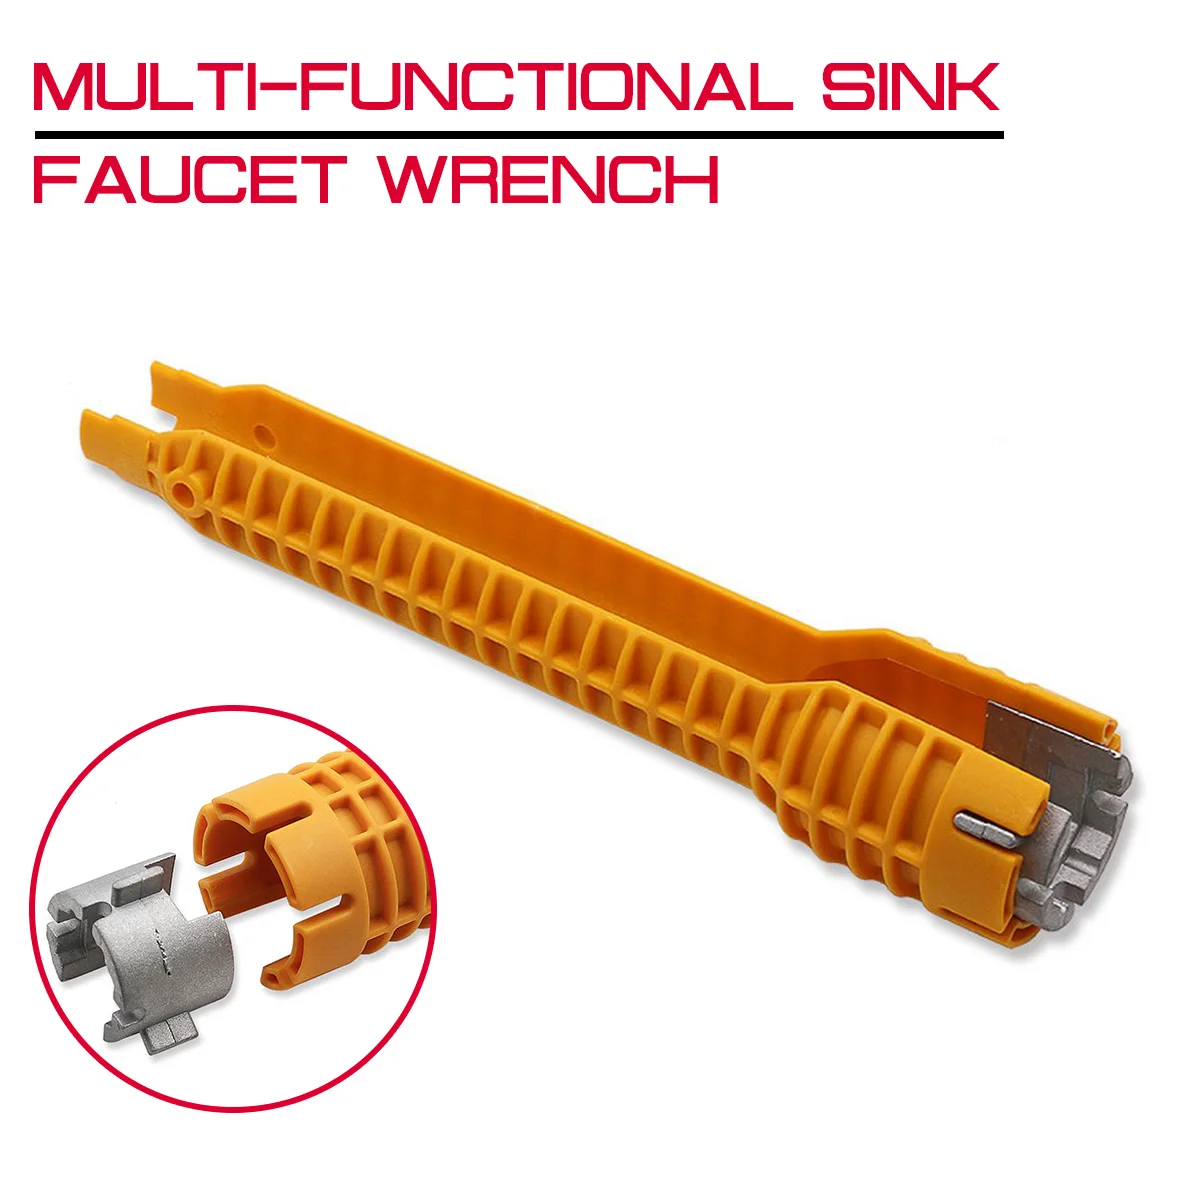 

MultifunctionSink Basin Faucet Wrench Household Bath Kitchen Install Tap Spanner Sink Installer Tools